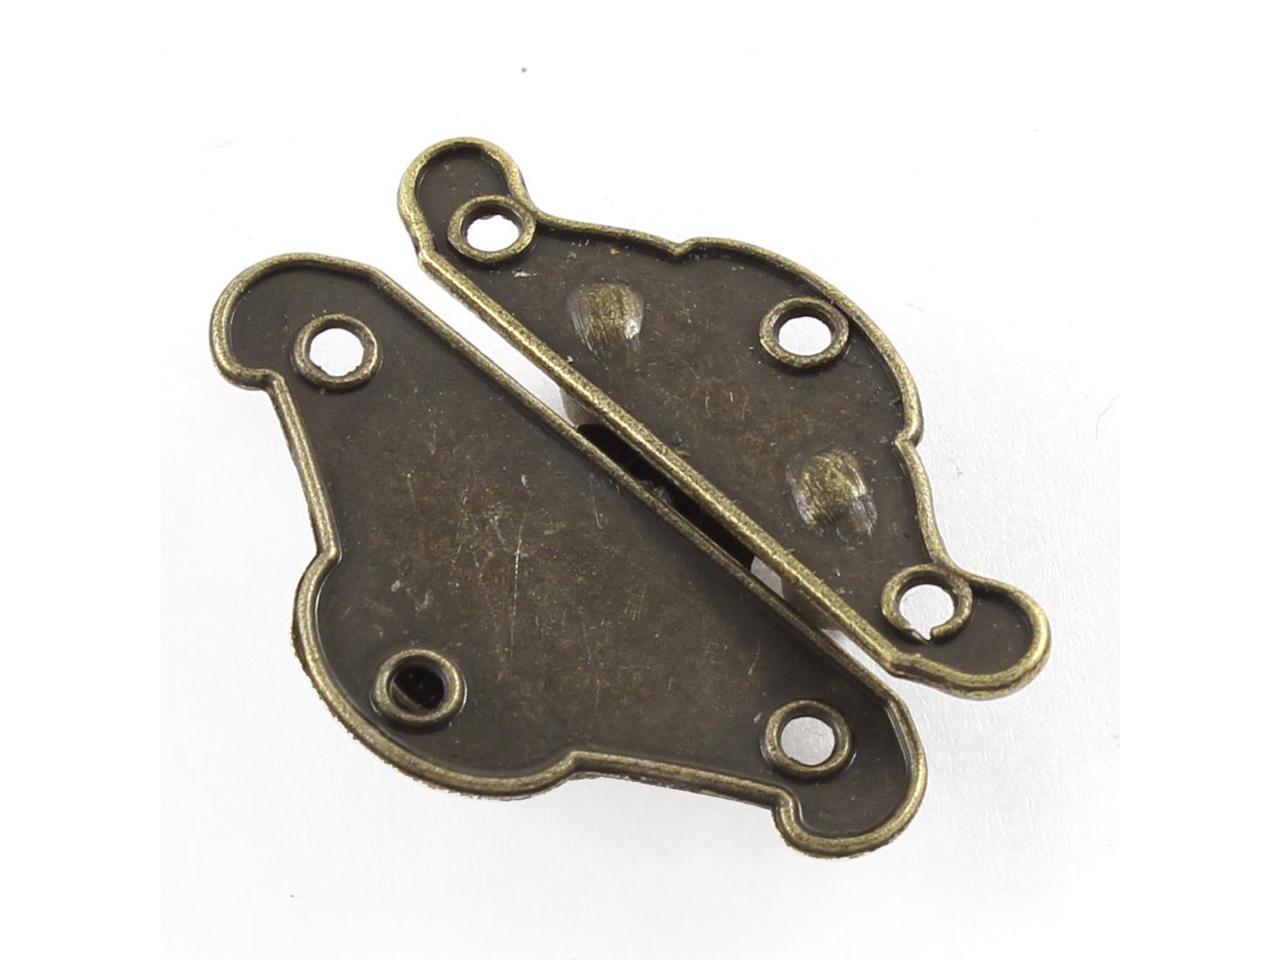 10pcs Bronze Tone 37mm x 27mm Retro Style Box Cabinet Hook Lock Lid Latch with Screws for Toolbox Jewelry Box 37mm x 27mm Necklace Box